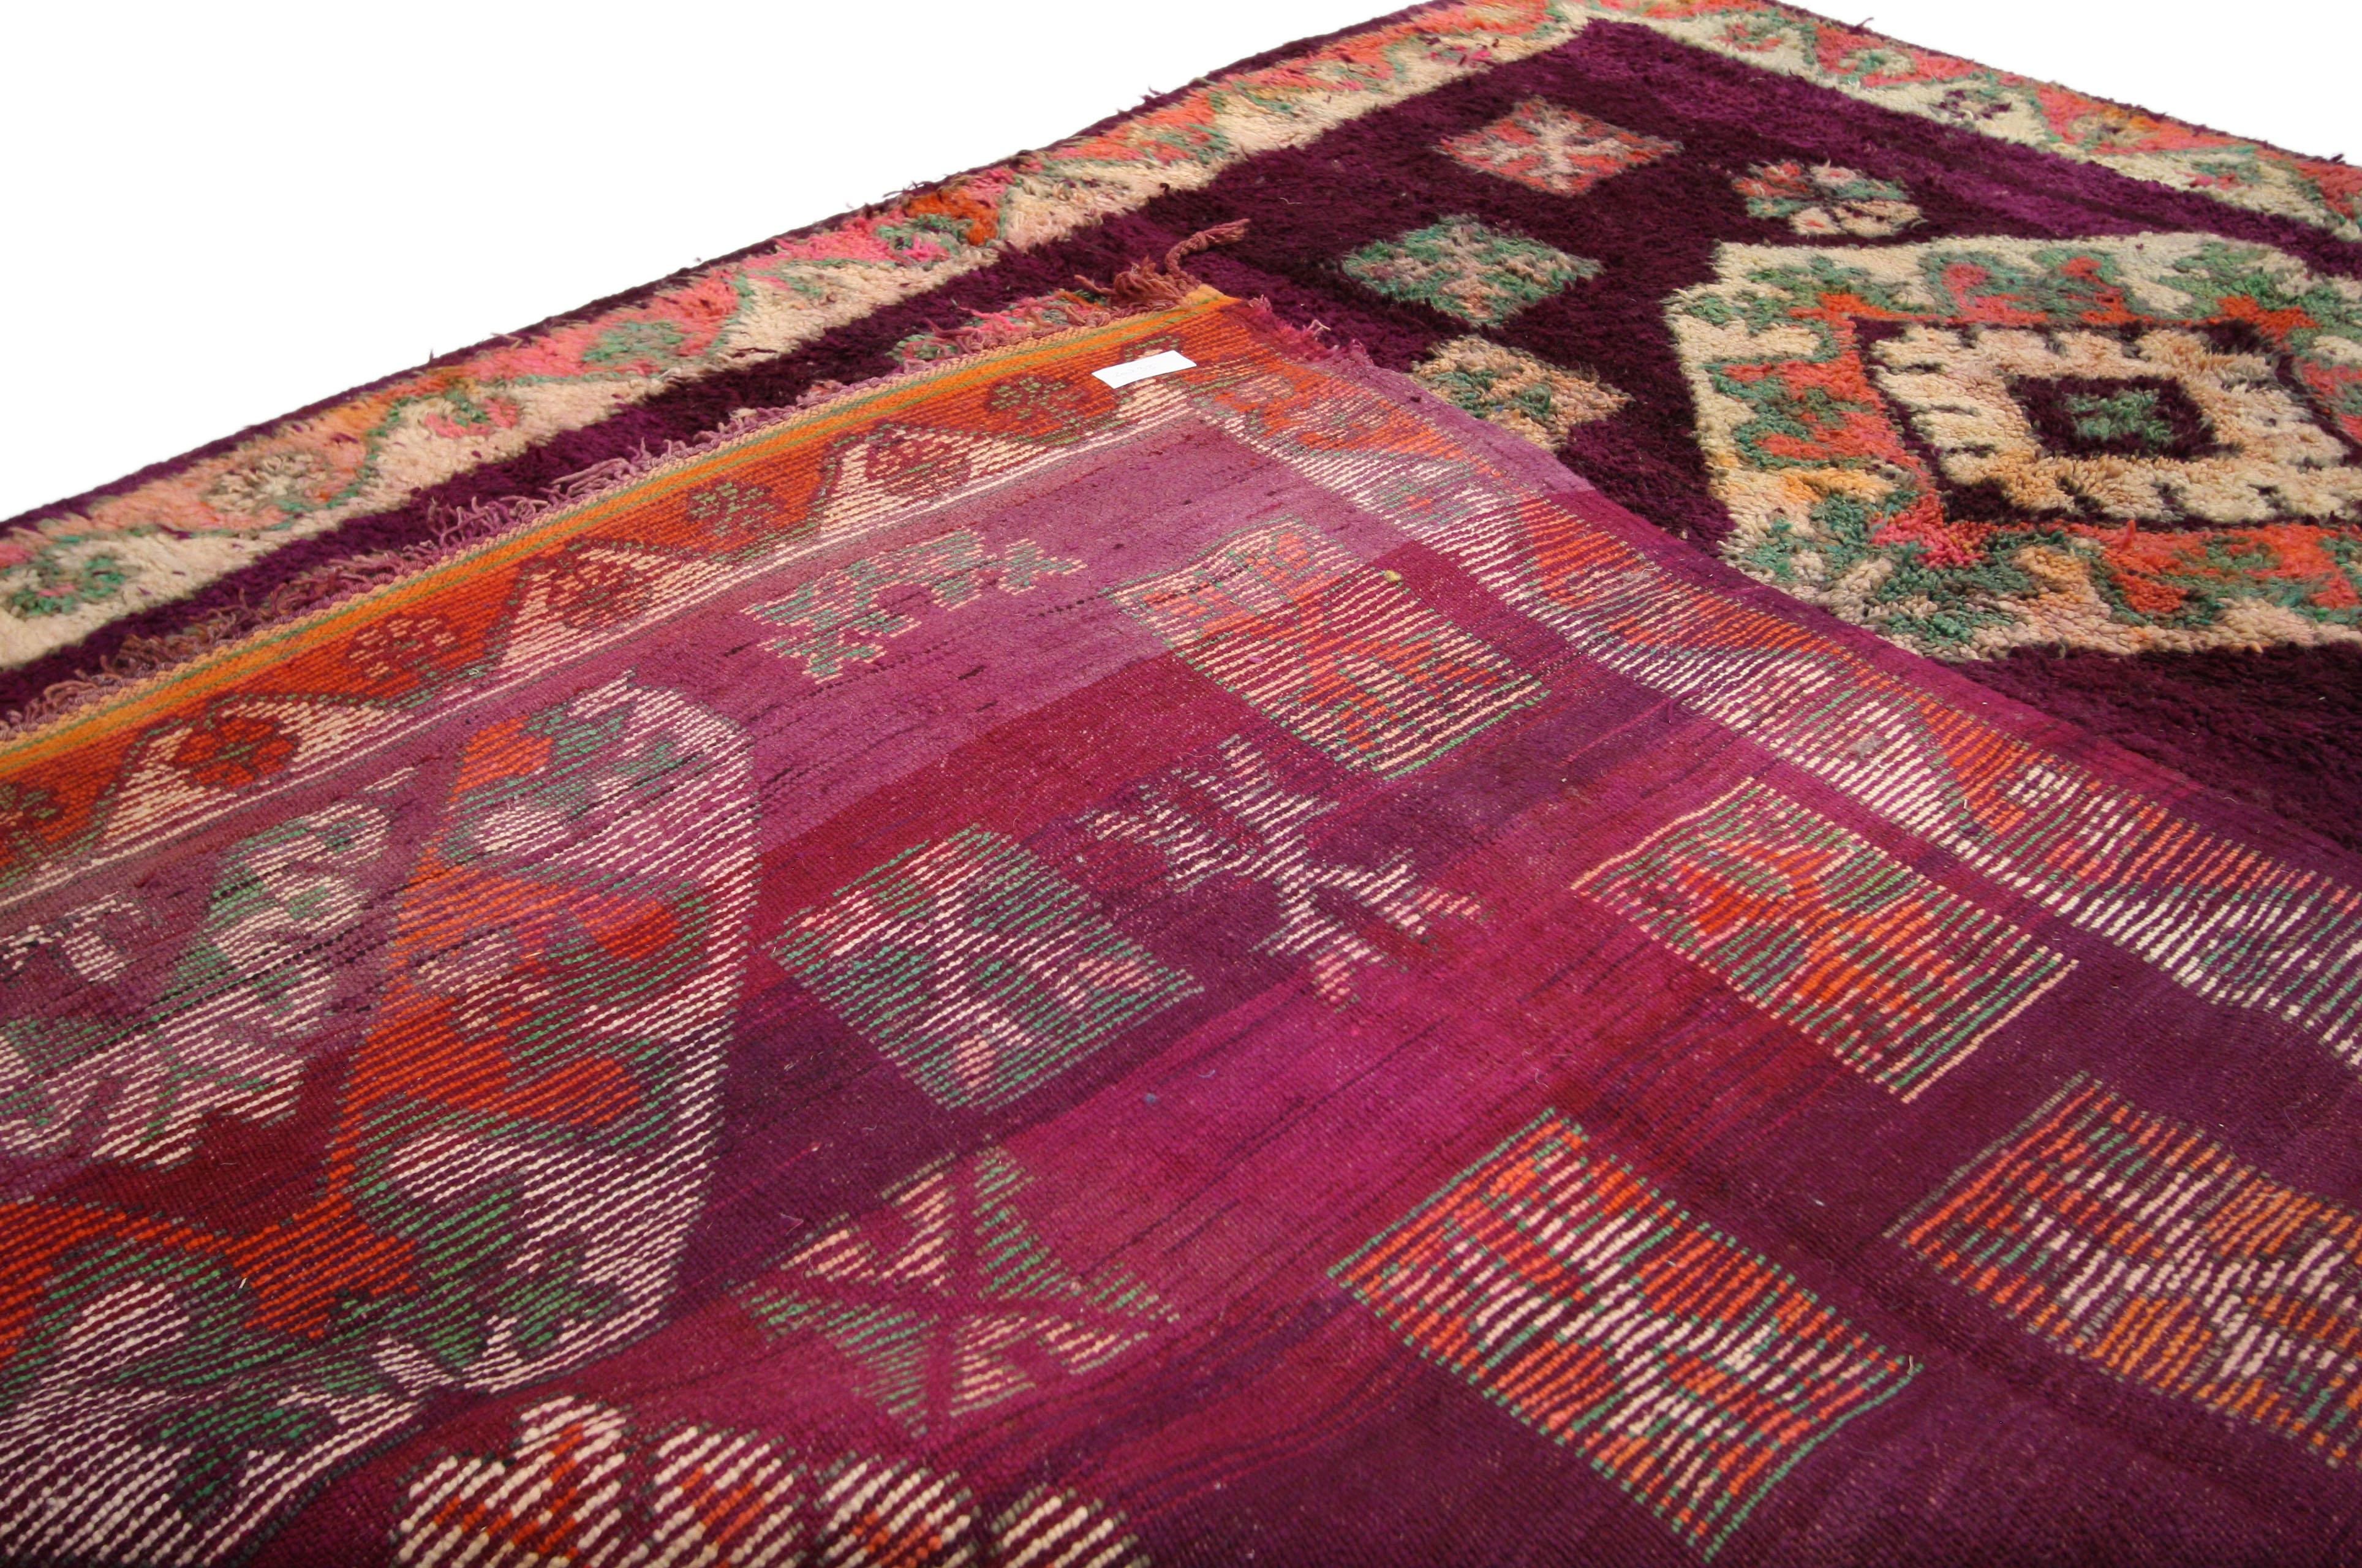 Vintage Moroccan Boujad Rug with Tribal Style, Colorful Moroccan Berber Carpet In Good Condition For Sale In Dallas, TX